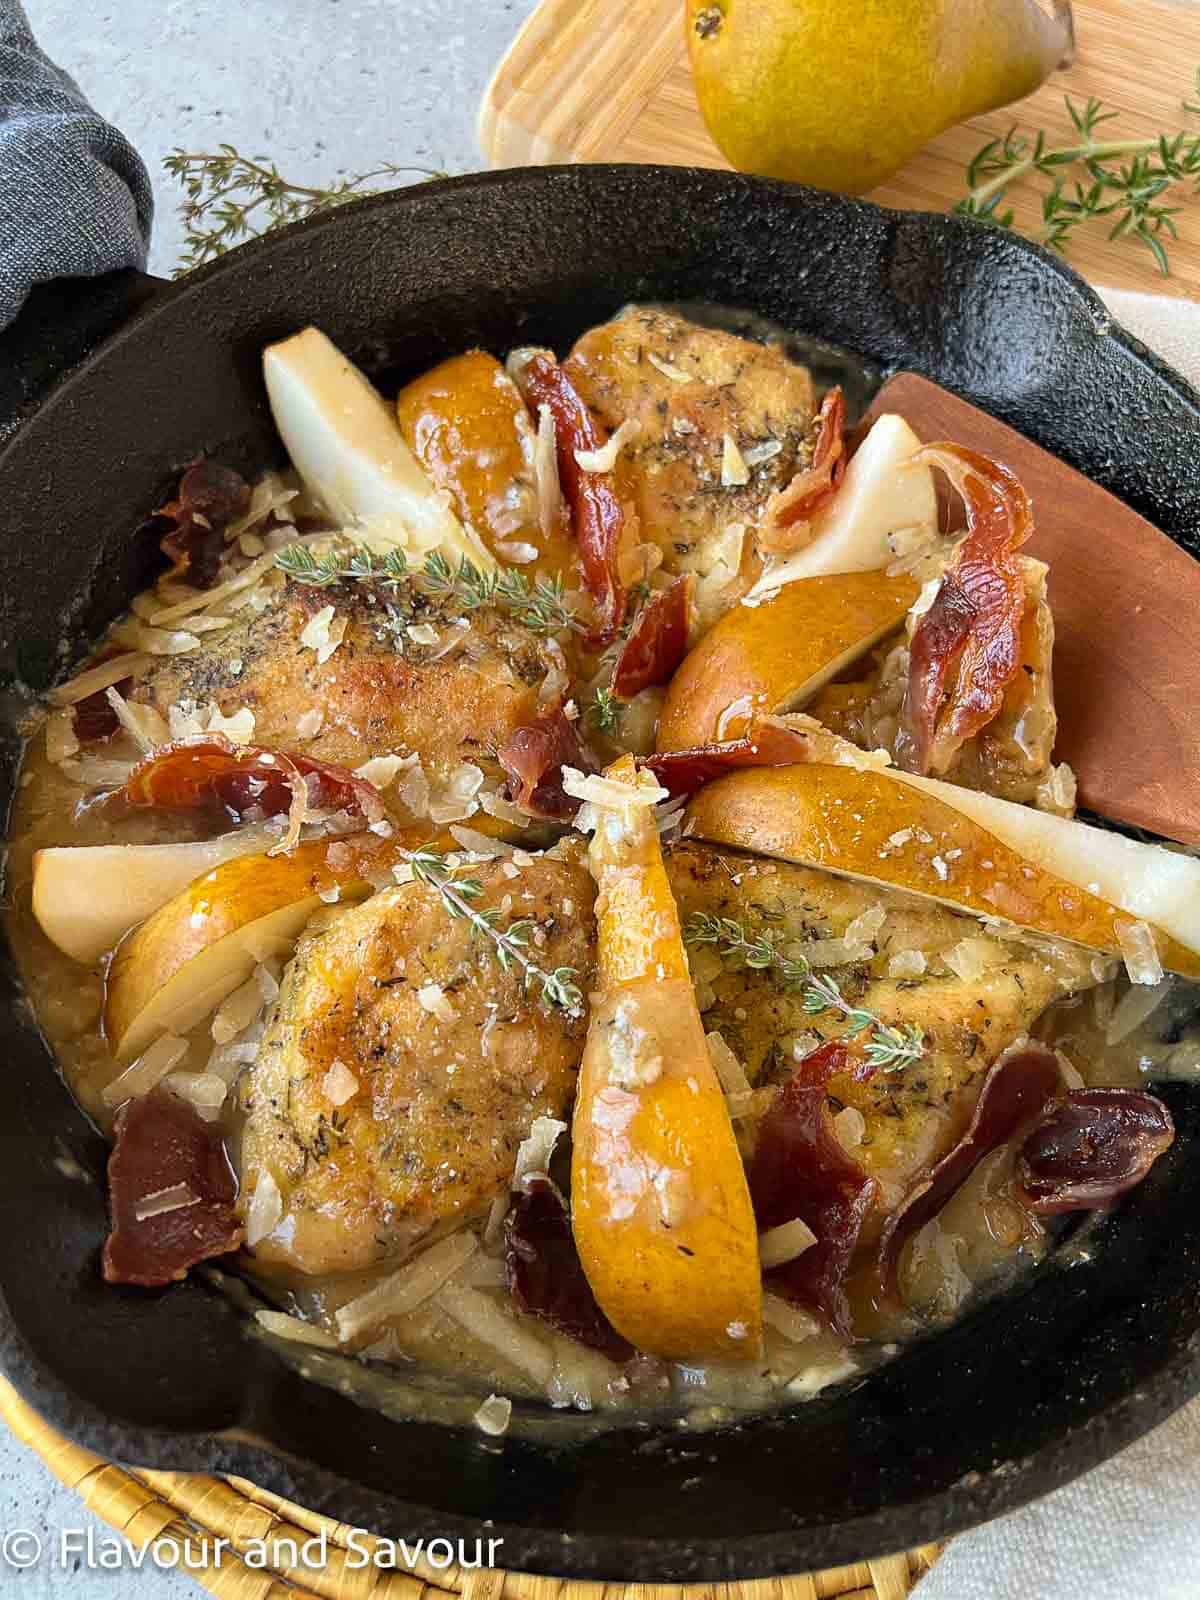 A cast iron pan with baked chicken breasts, sliced pears and small pieces of prosciutto.